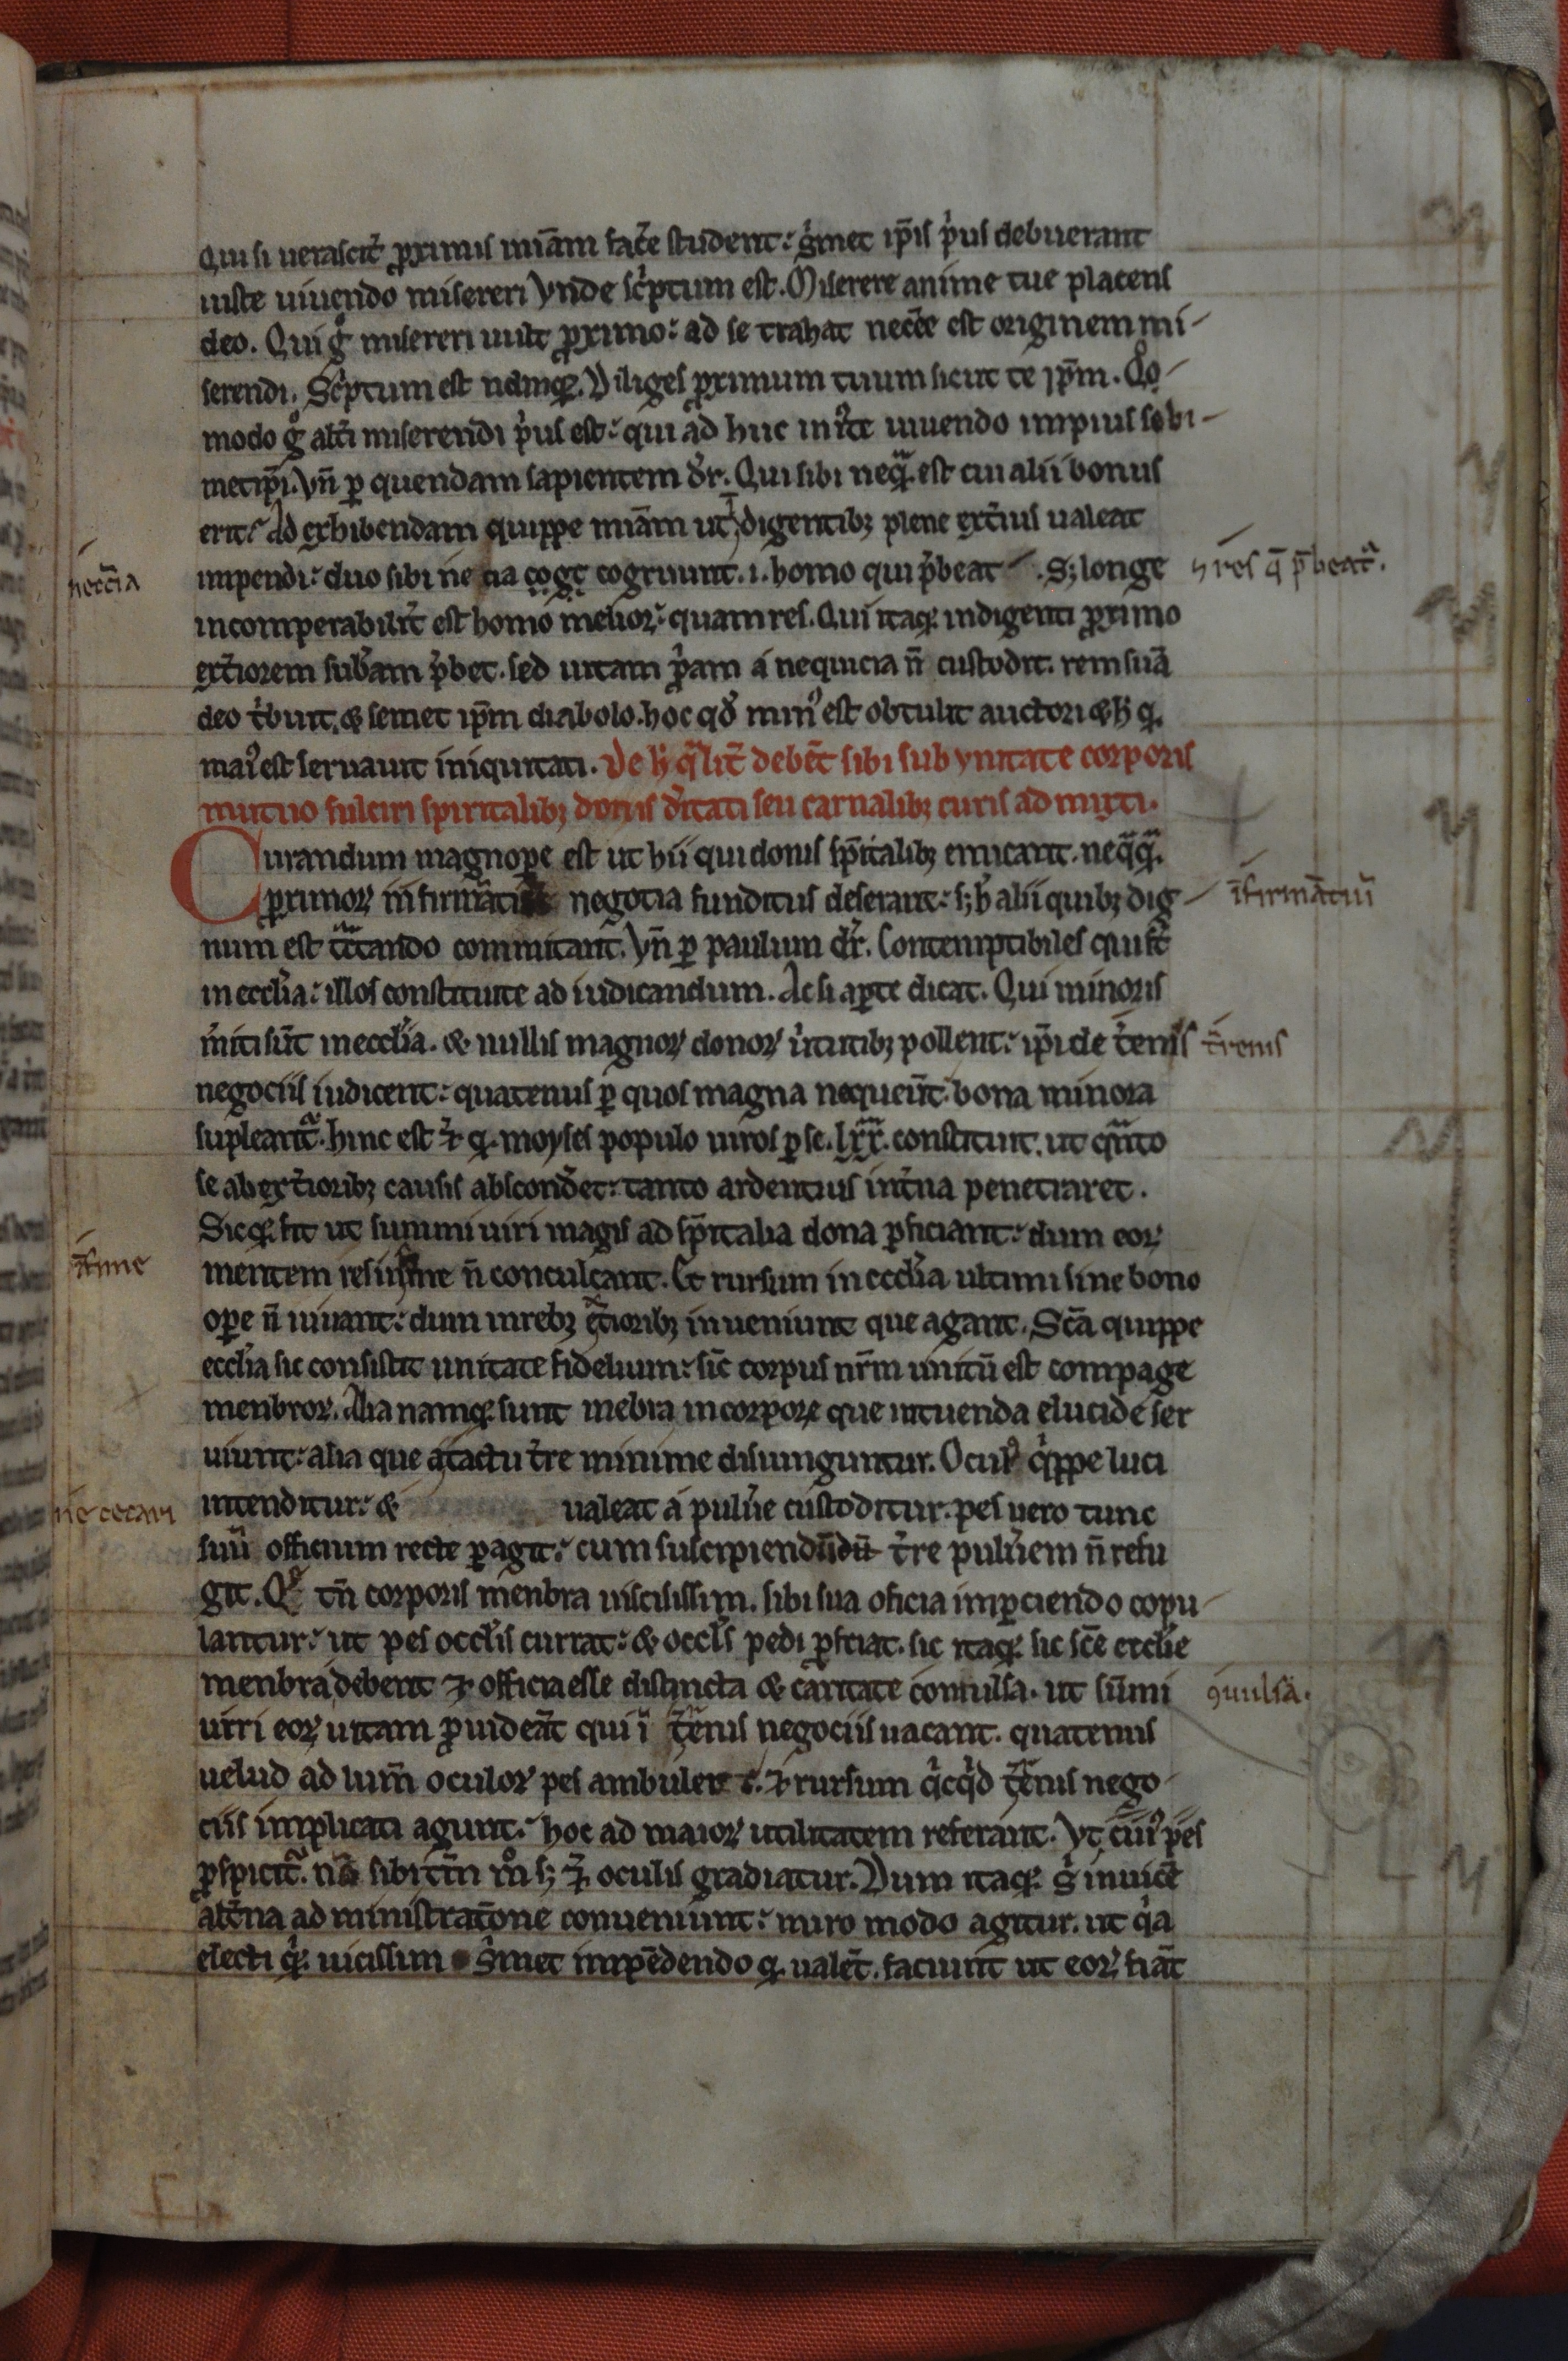 Inline and marginal corrections to Cambridge, Pembroke College, MS 115, fol. 66r.